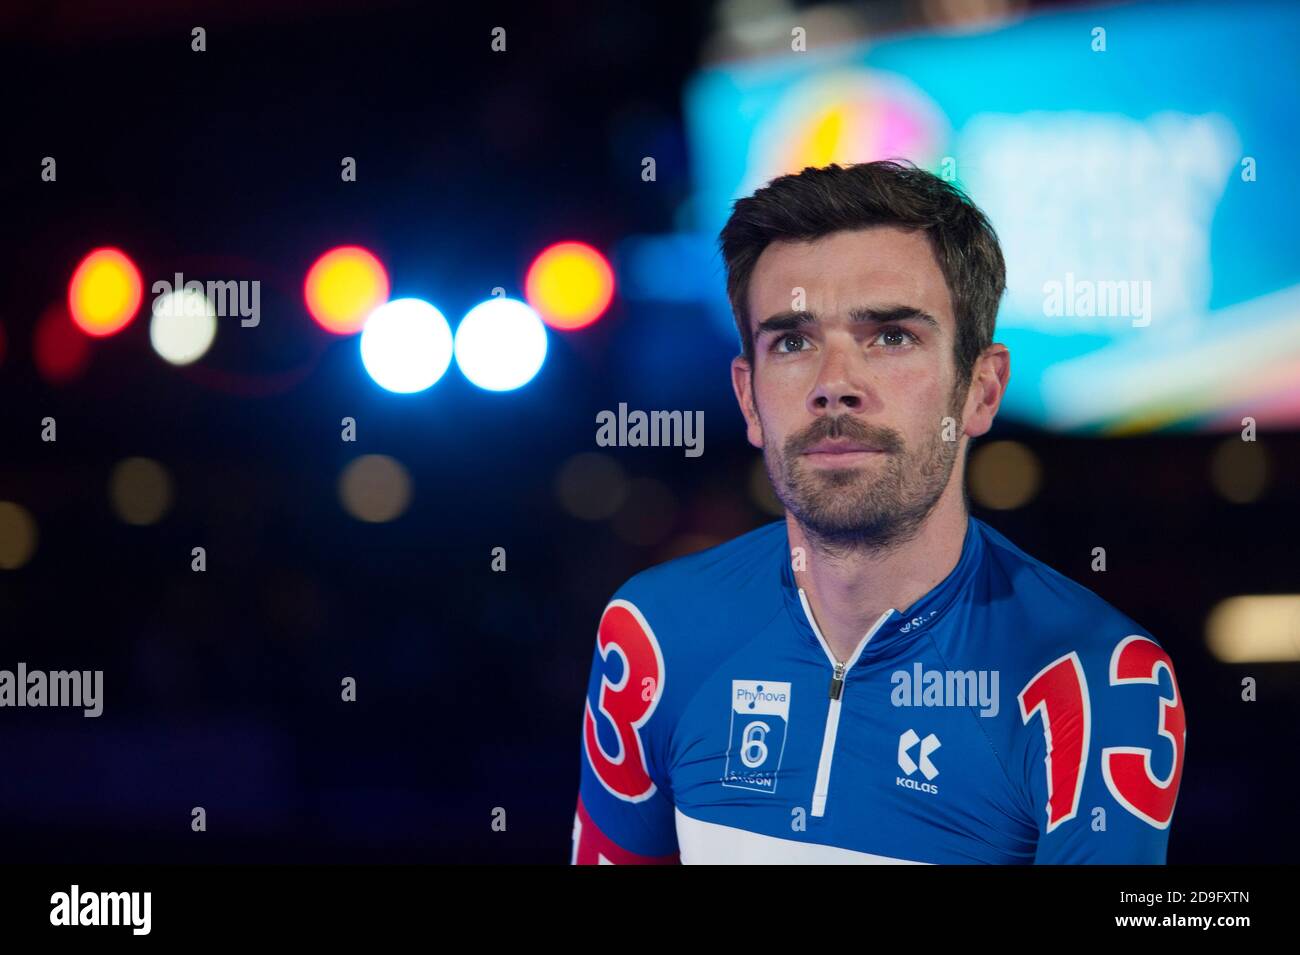 Andy Tennant. Riders were taking part in the Six Day track championship at Lee Valley Velodrome, London Stock Photo